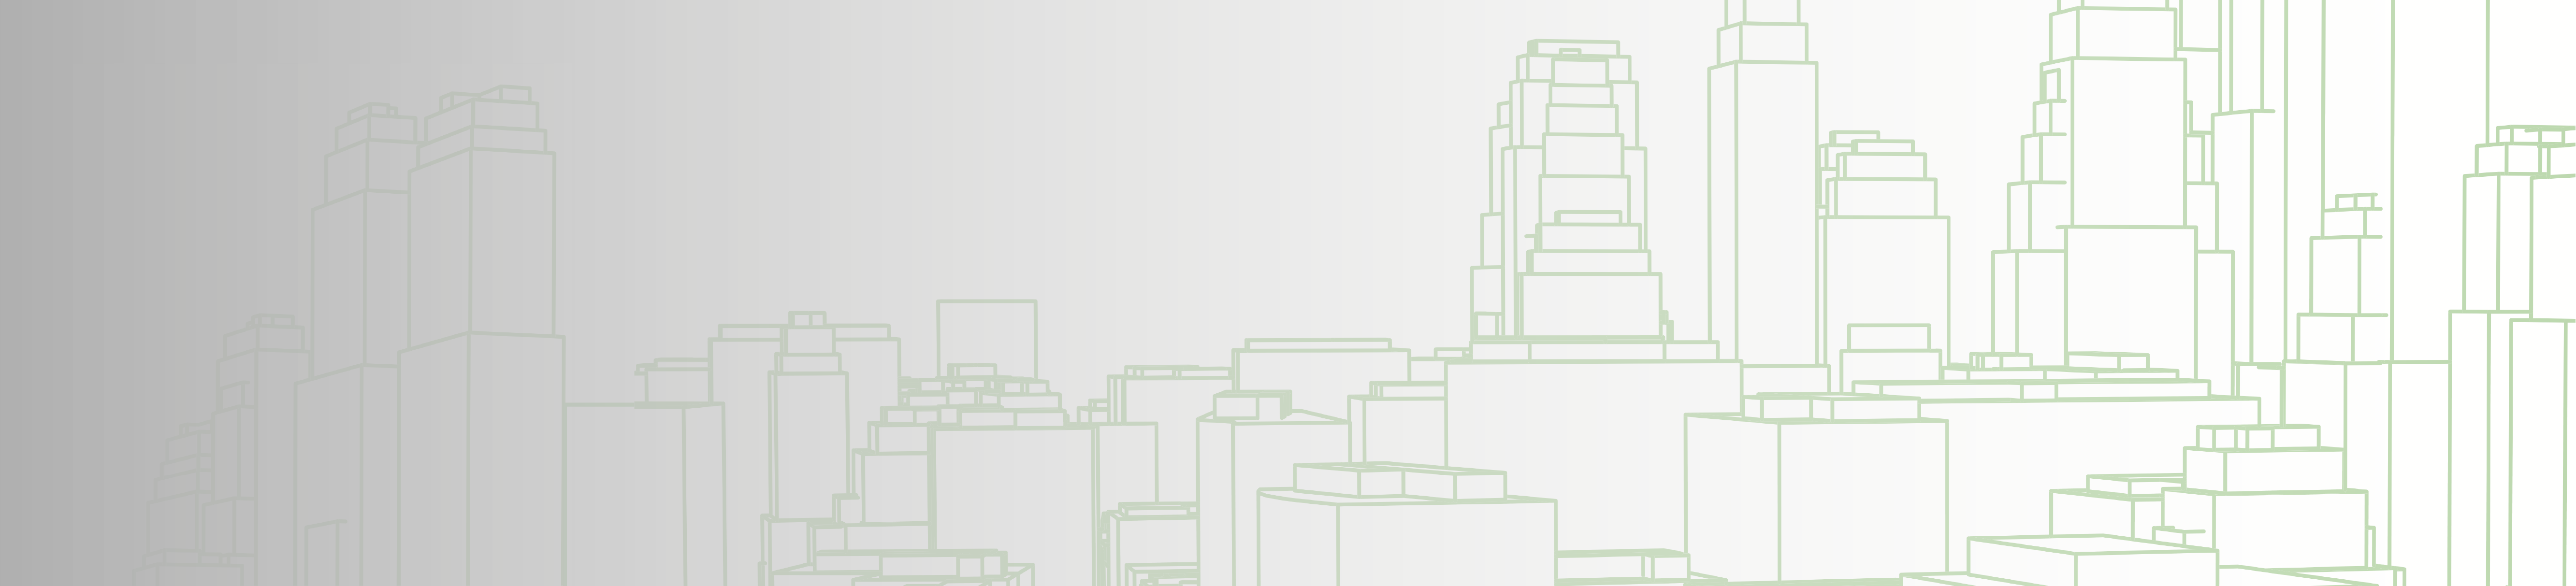  A composite image of a high rise building in black and white on a background line drawing of a city filled with skyscrapers with smaller overlaid maps in shades of green